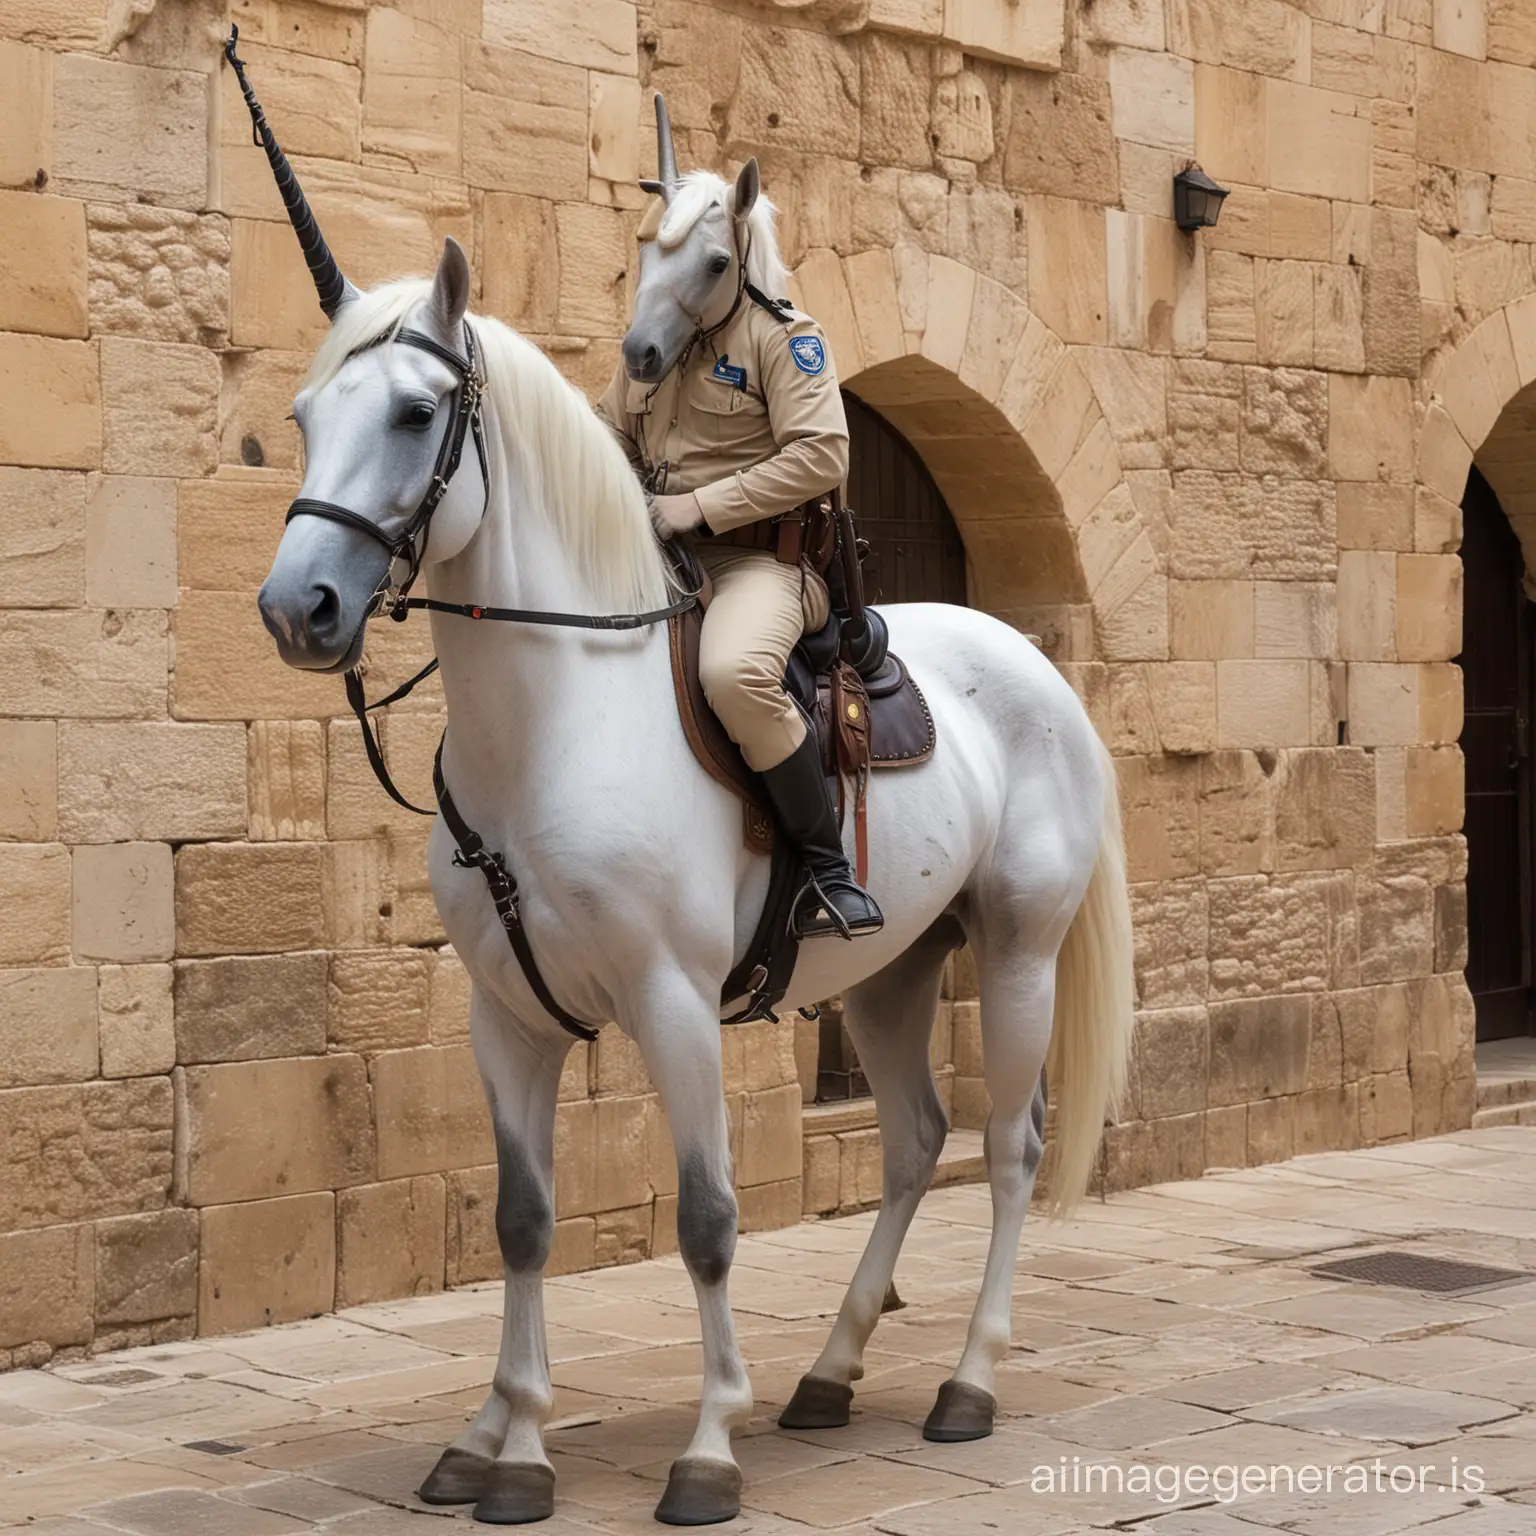 Israeli policeman and a unicorn in the old city of Jerusalem. The horse has 4 legs and one big horn in the middle.